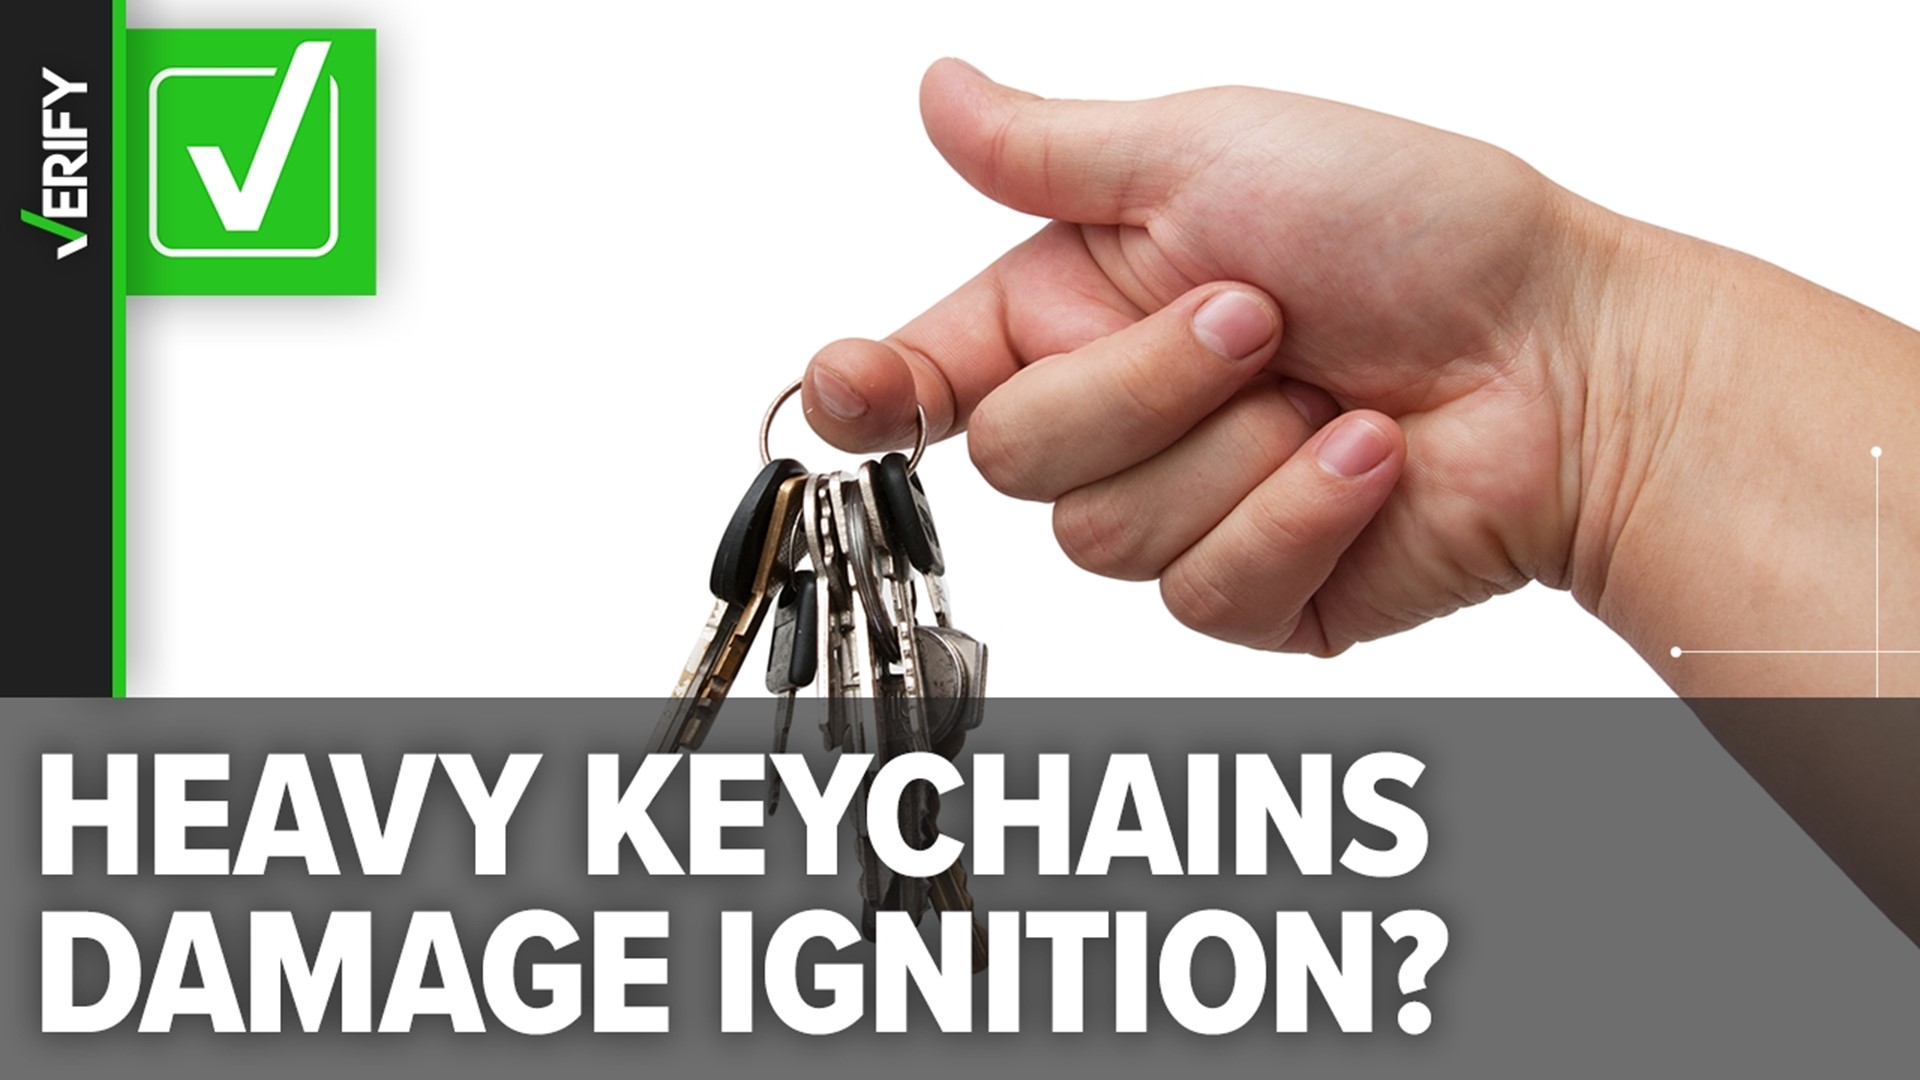 Several social media posts claim having a heavy keychain can damage your car’s ignition. A VERIFY reader reached out to our team to ask if this is true.